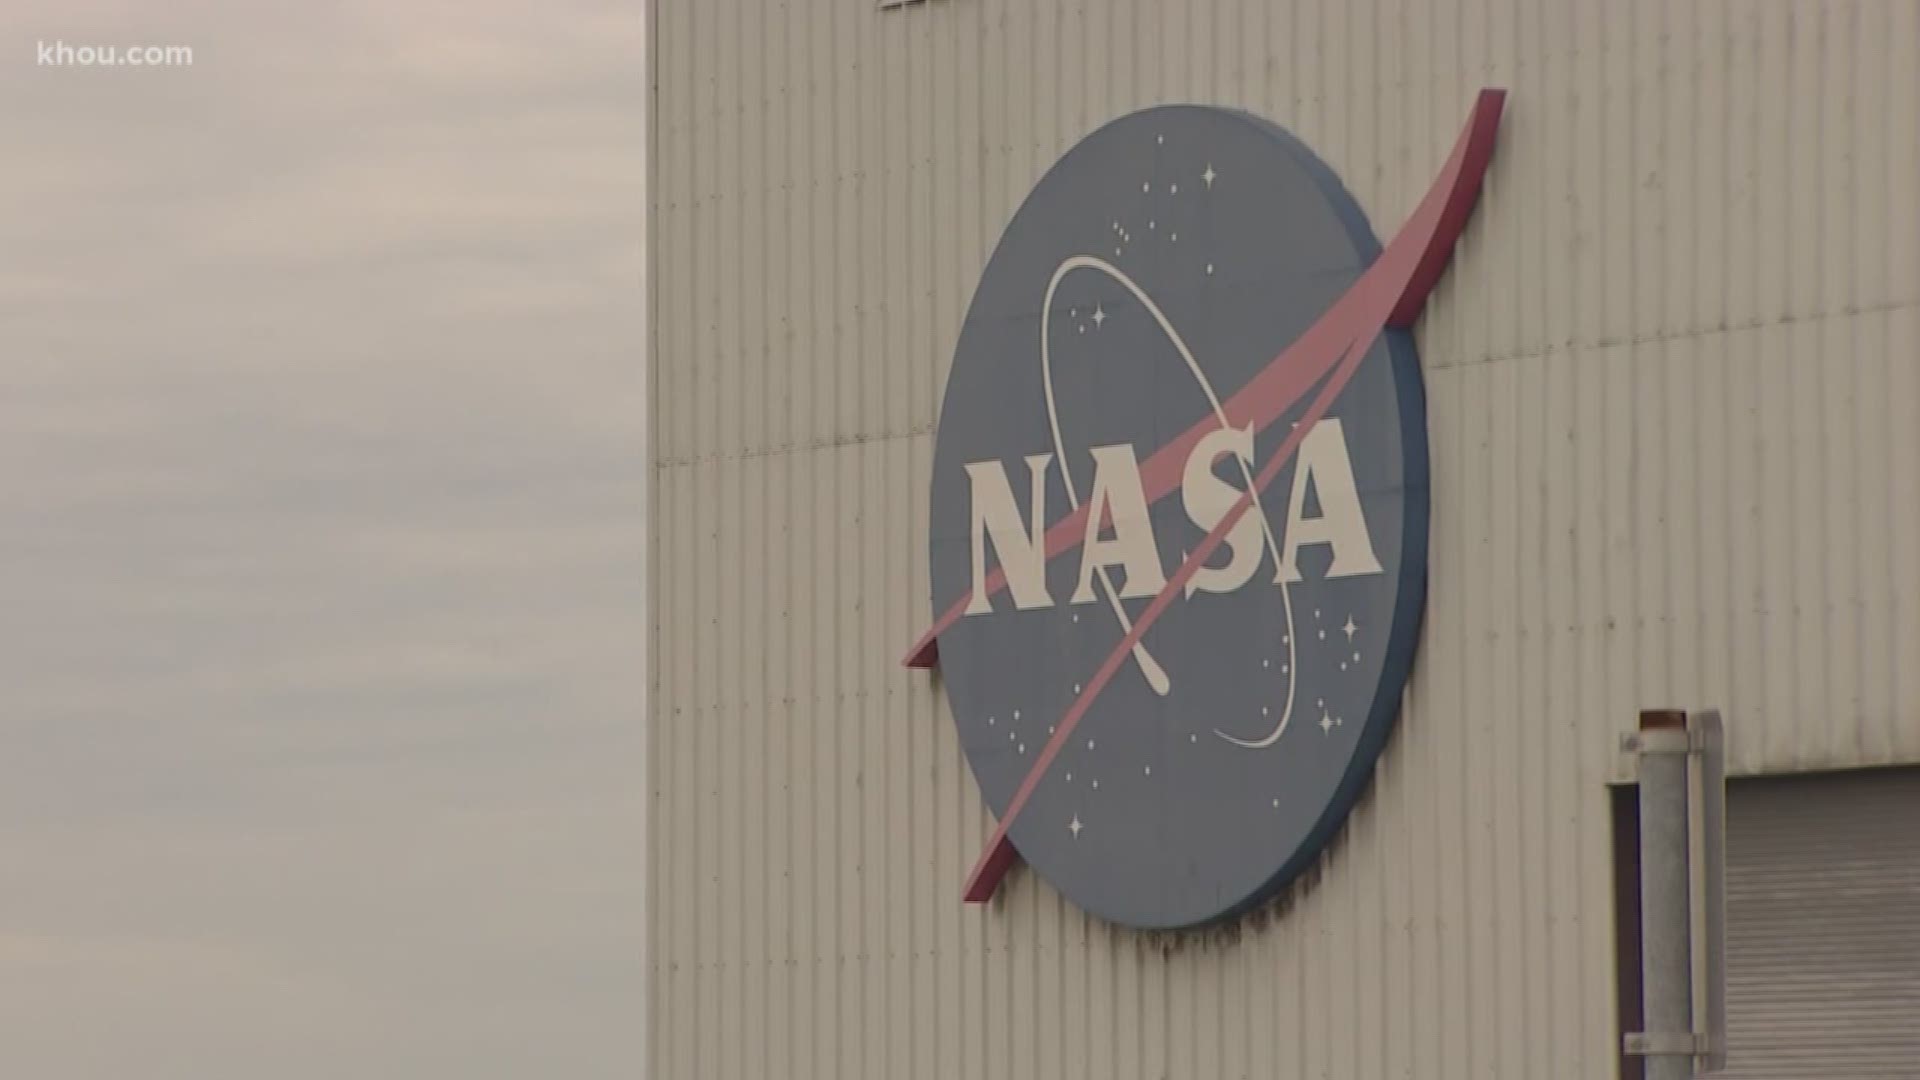 An event was held in the Clear Creek area on Friday to help employees at NASA who have not been paid since the government shutdown.